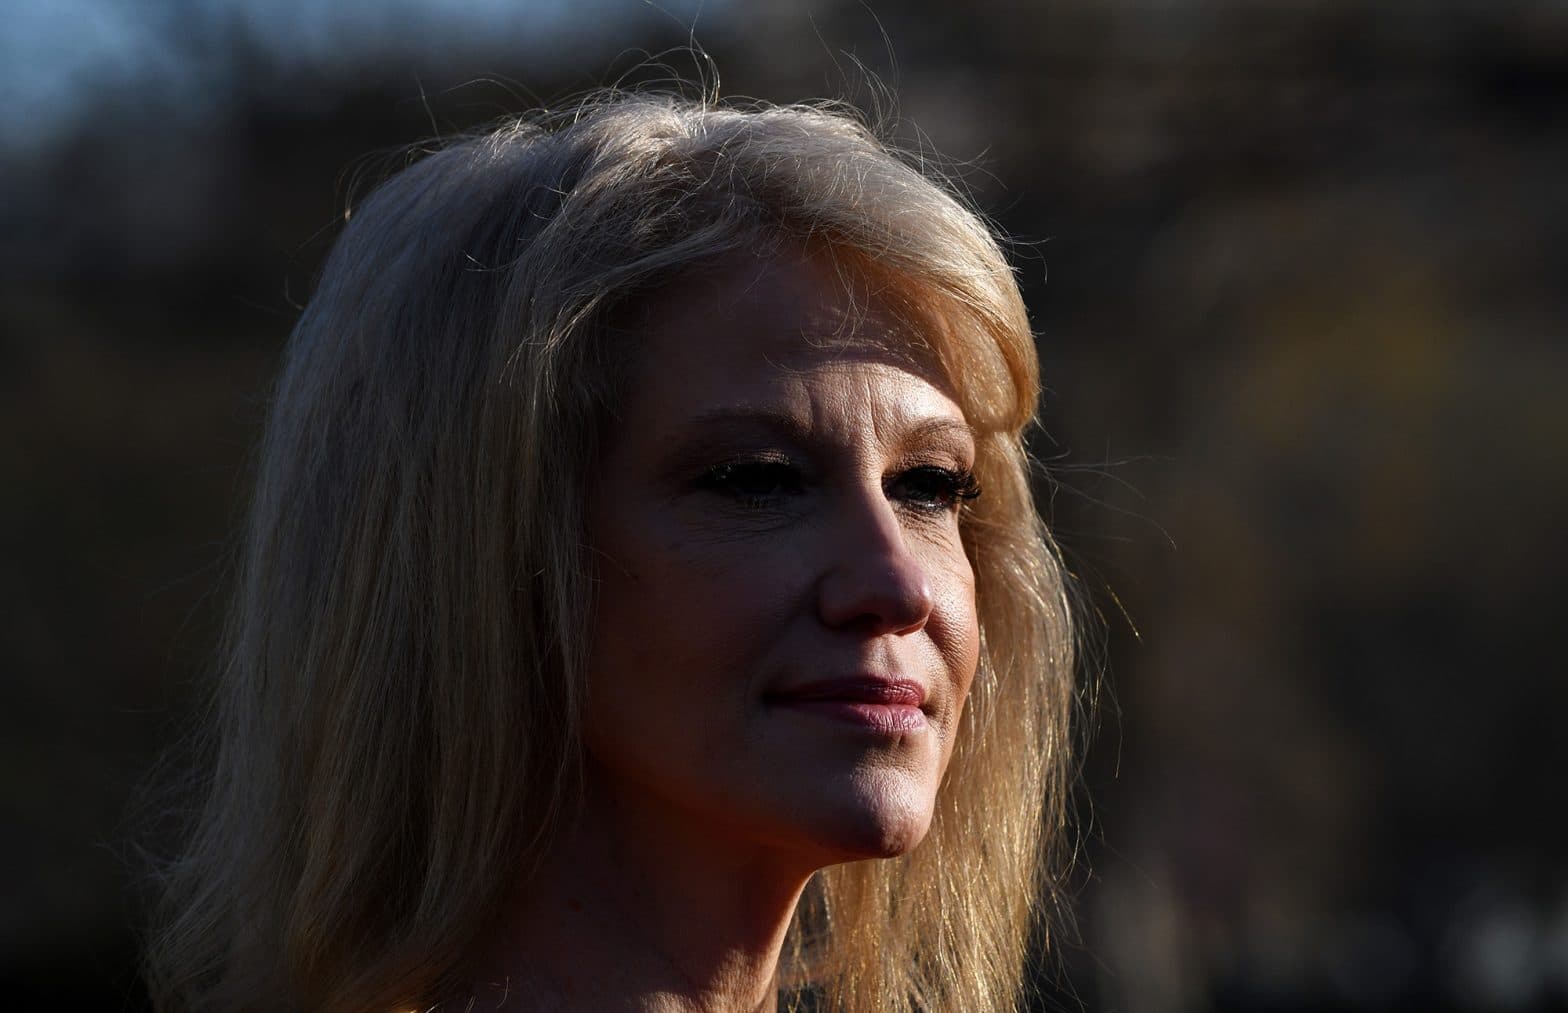 Trump Says He’s Not Firing Kellyanne Conway in Wake of Hatch Act Report